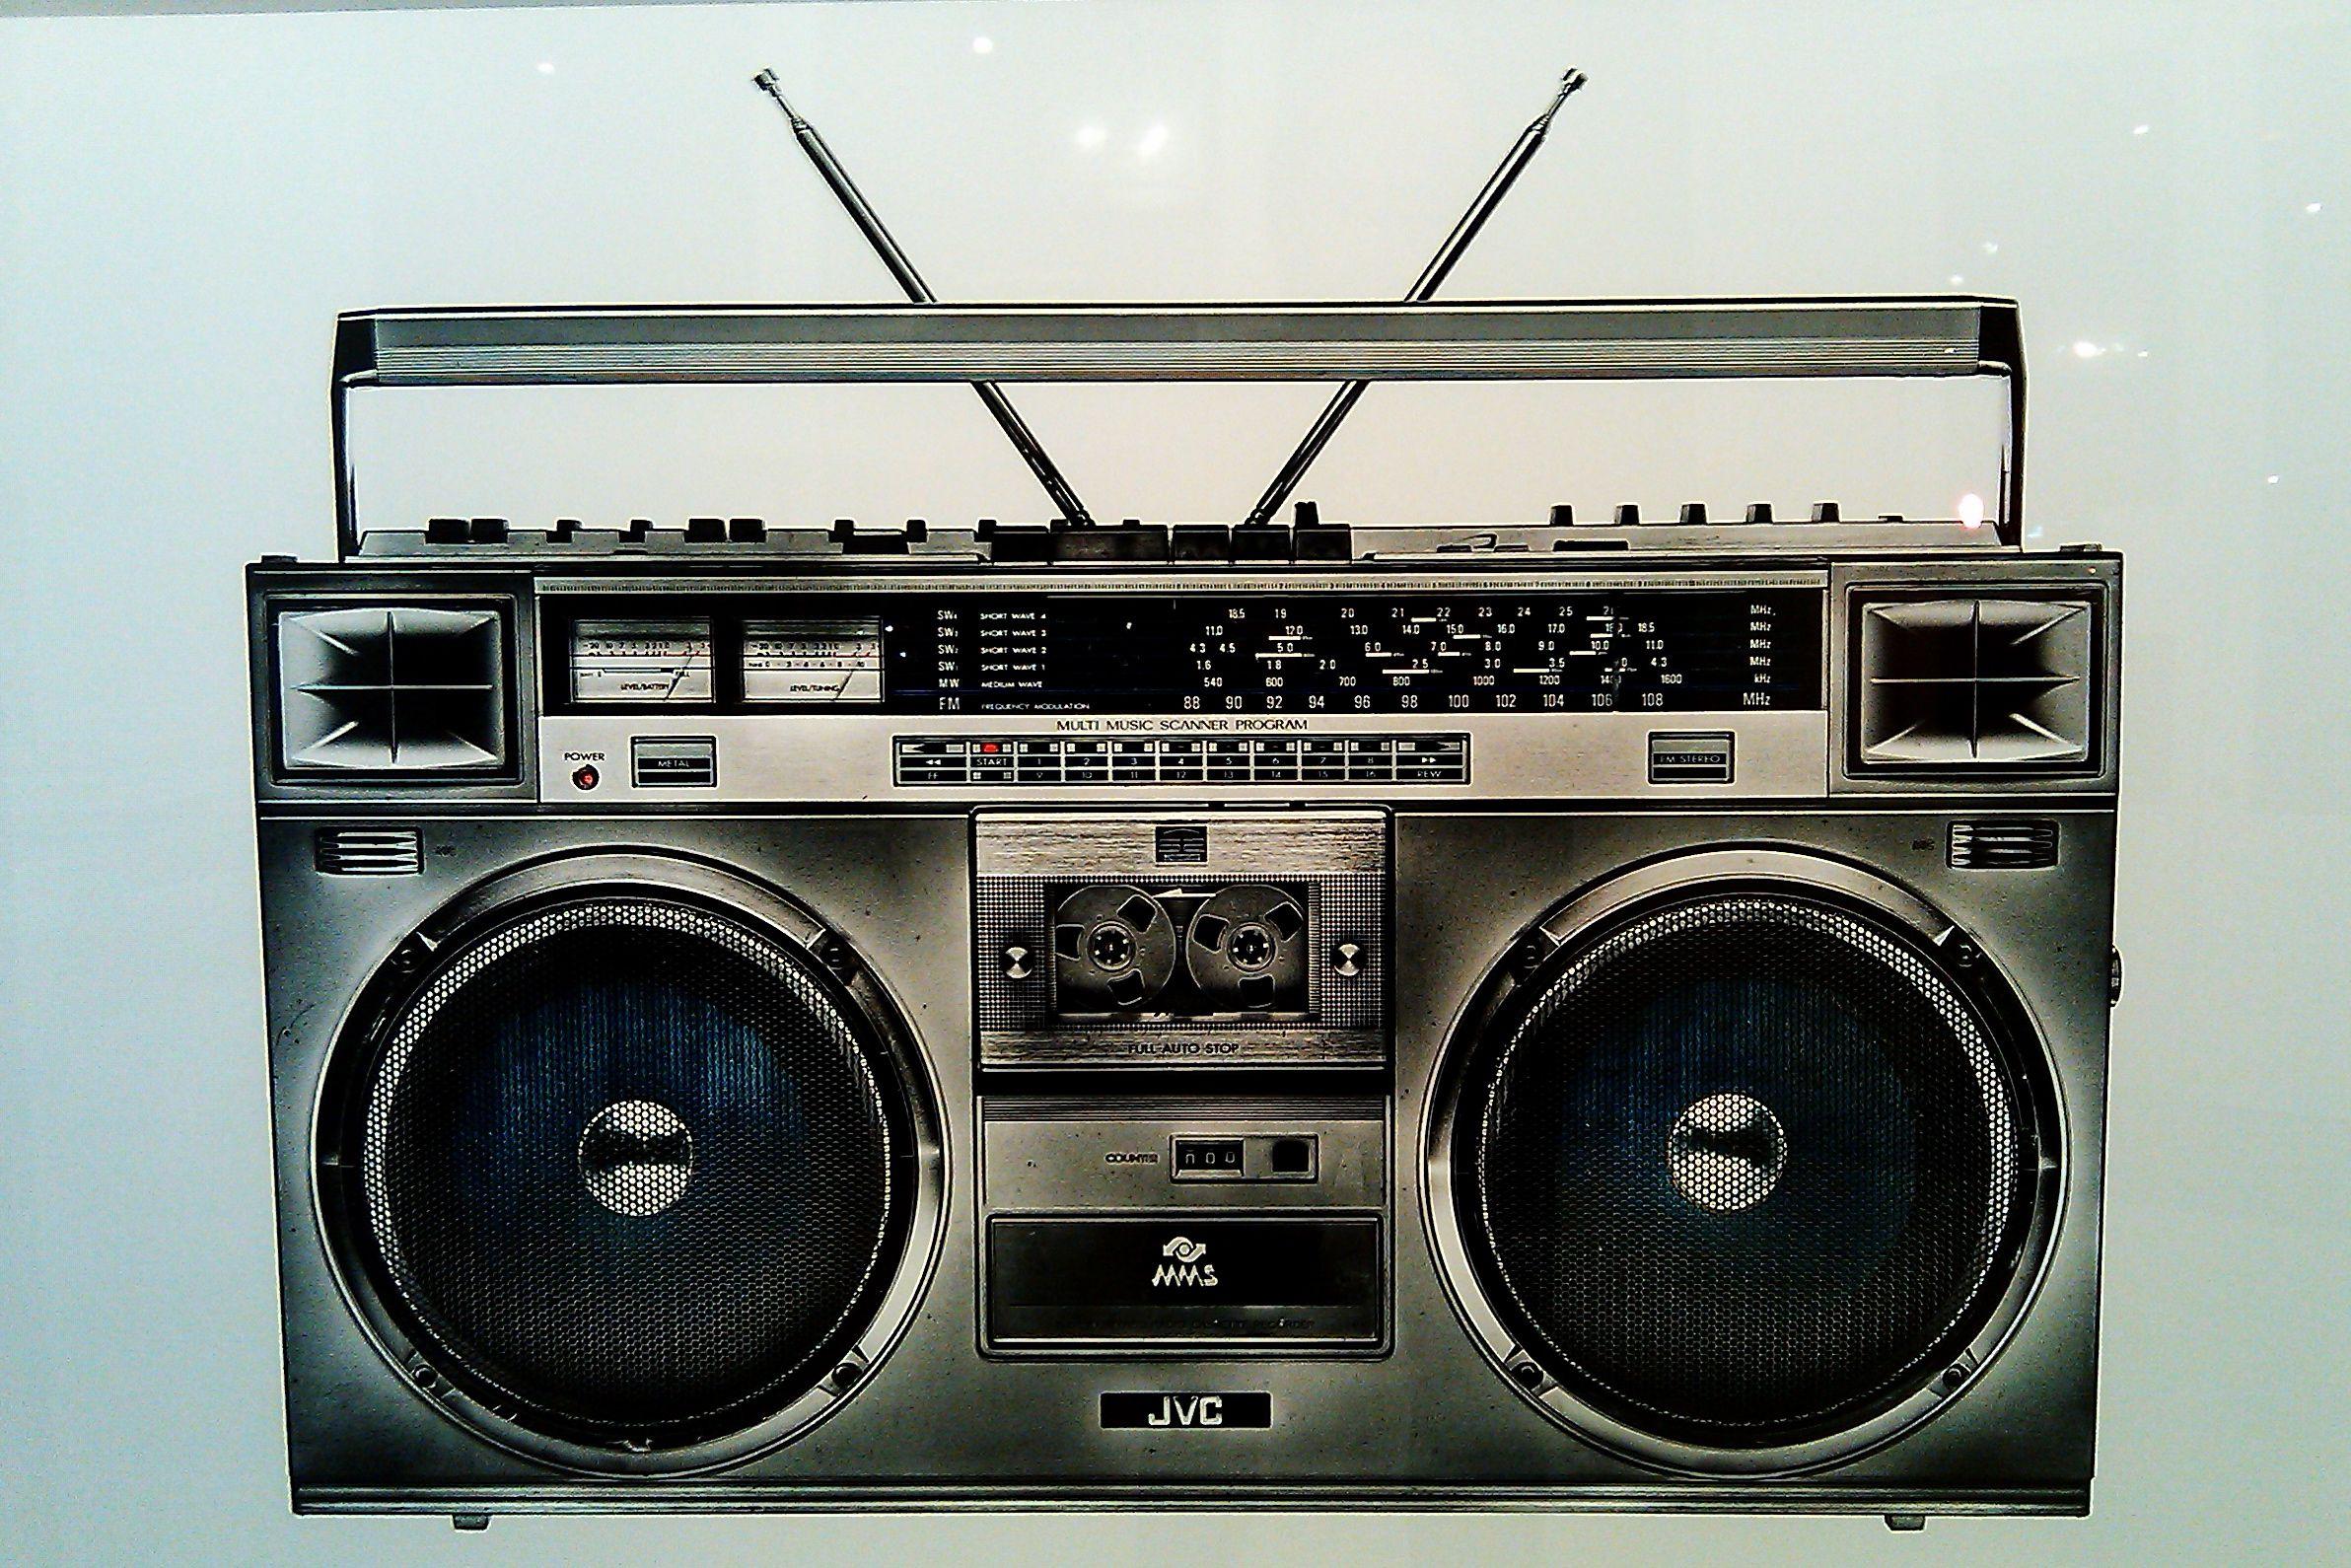 Old School Boombox Drawing.com. Free for personal